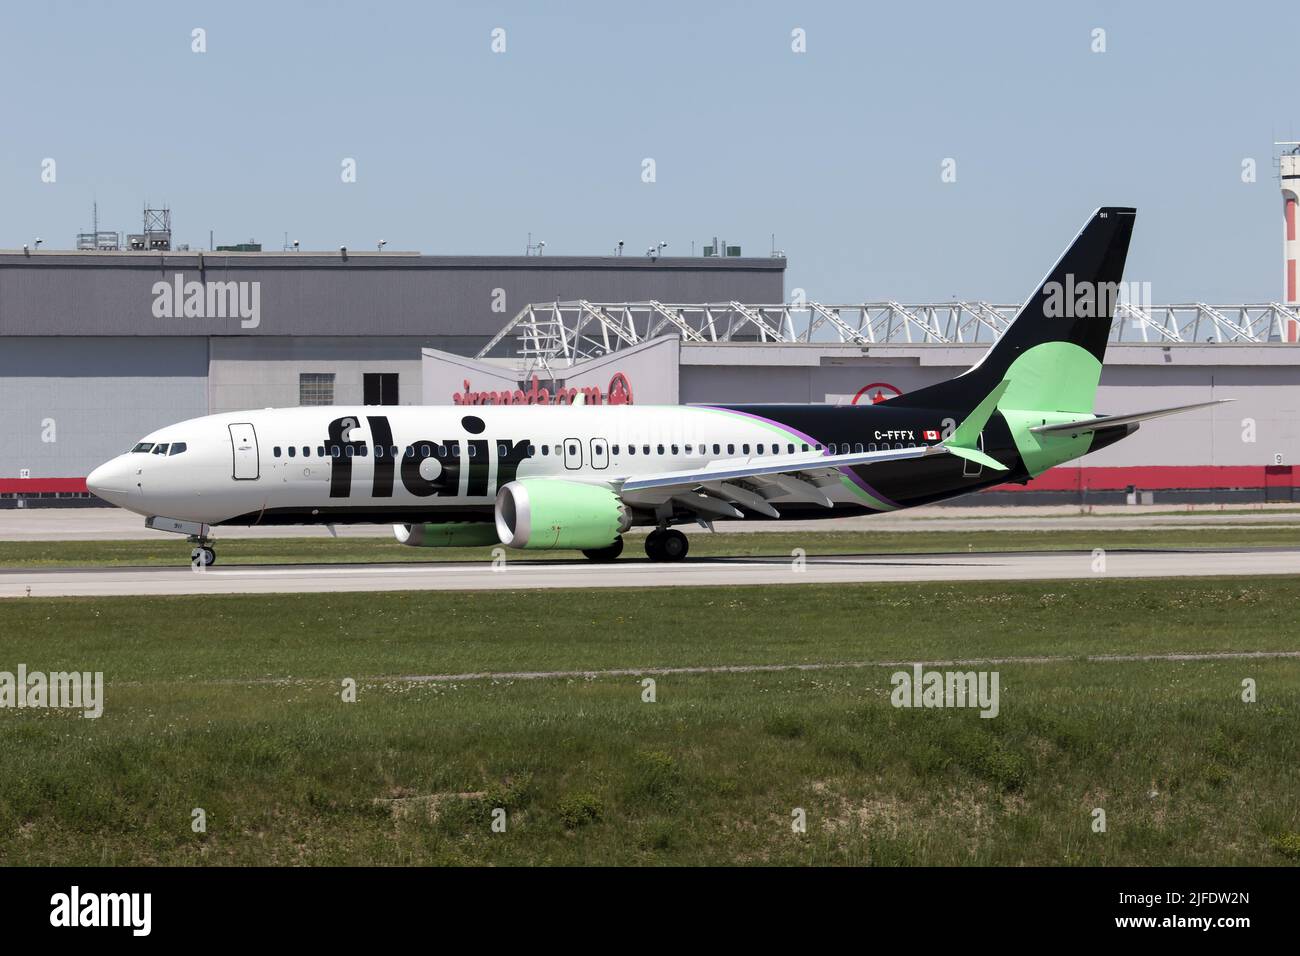 A Flair Airlines Boeing 737-8 MAX just landed at Montreal Pierre Elliott Trudeau Int'l Airport. Flair Airlines is a Canadian low-cost airline headquartered in Edmonton, Alberta, with its main operating base at Edmonton International Airport. Stock Photo